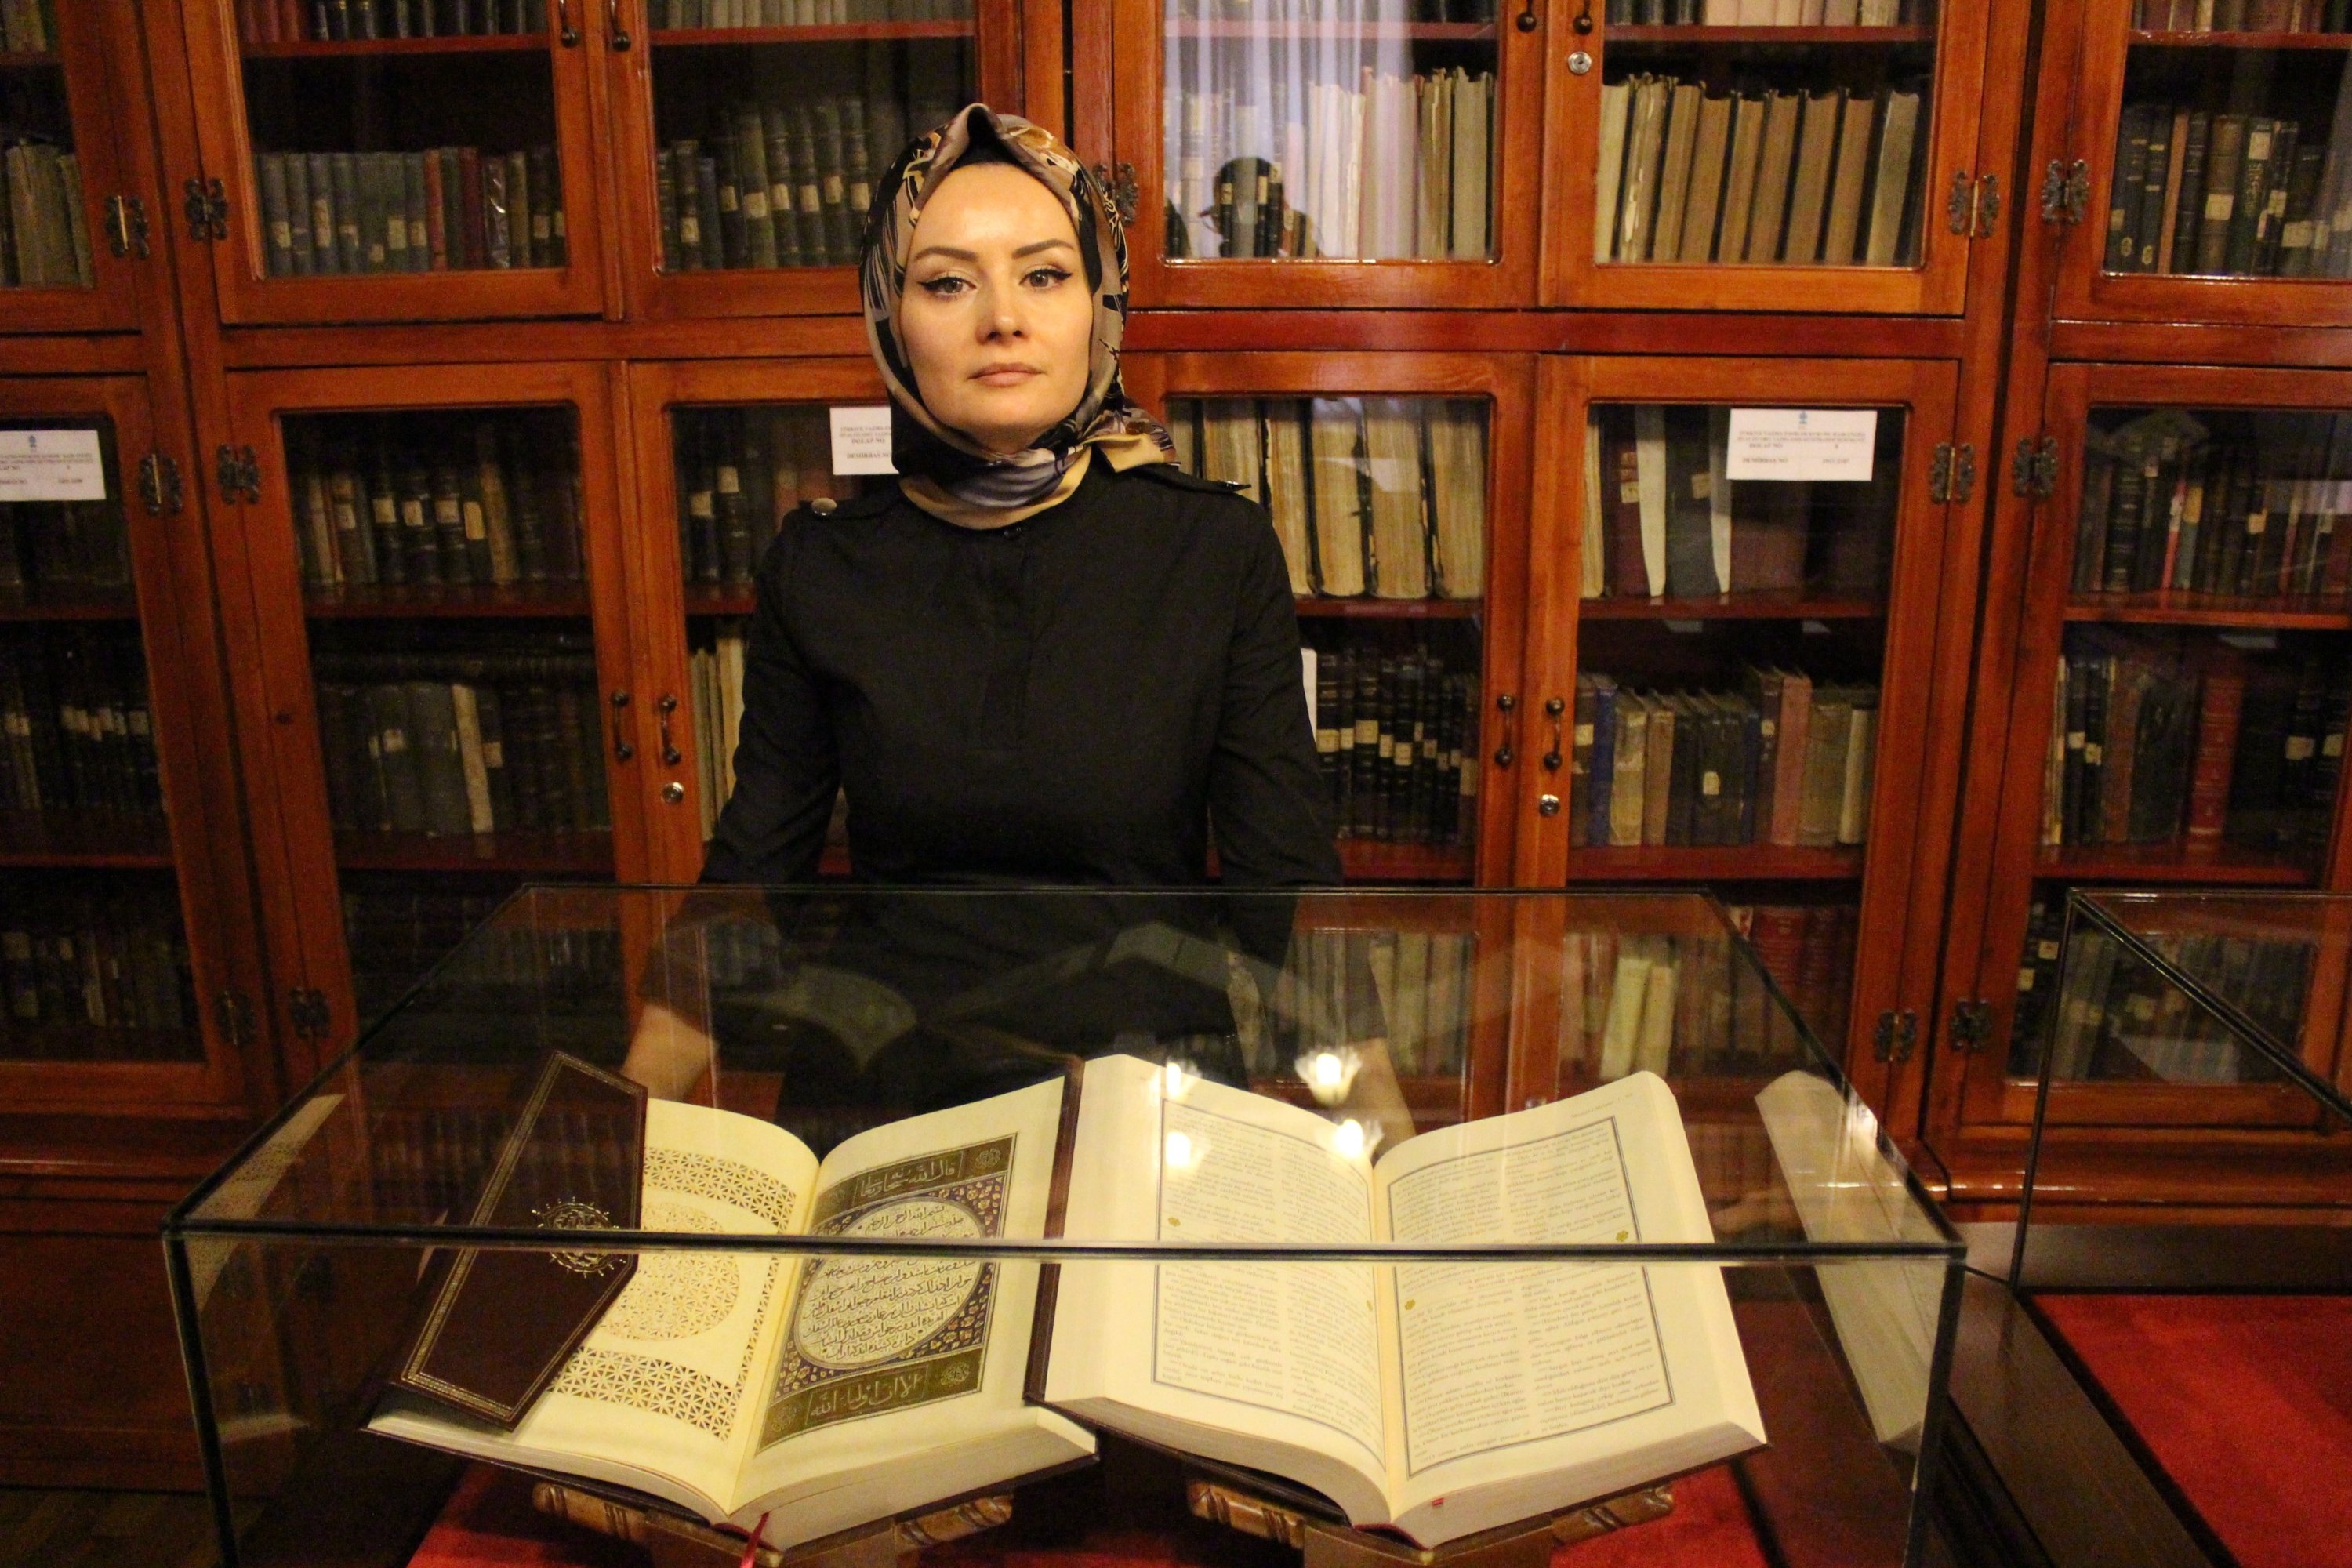 Library Director Dahiye Karagülle is seen together with manuscripts in the historic Ziyabey Manuscripts Library in Sivas, eastern Turkey, Nov. 18, 2021. (IHA Photo)